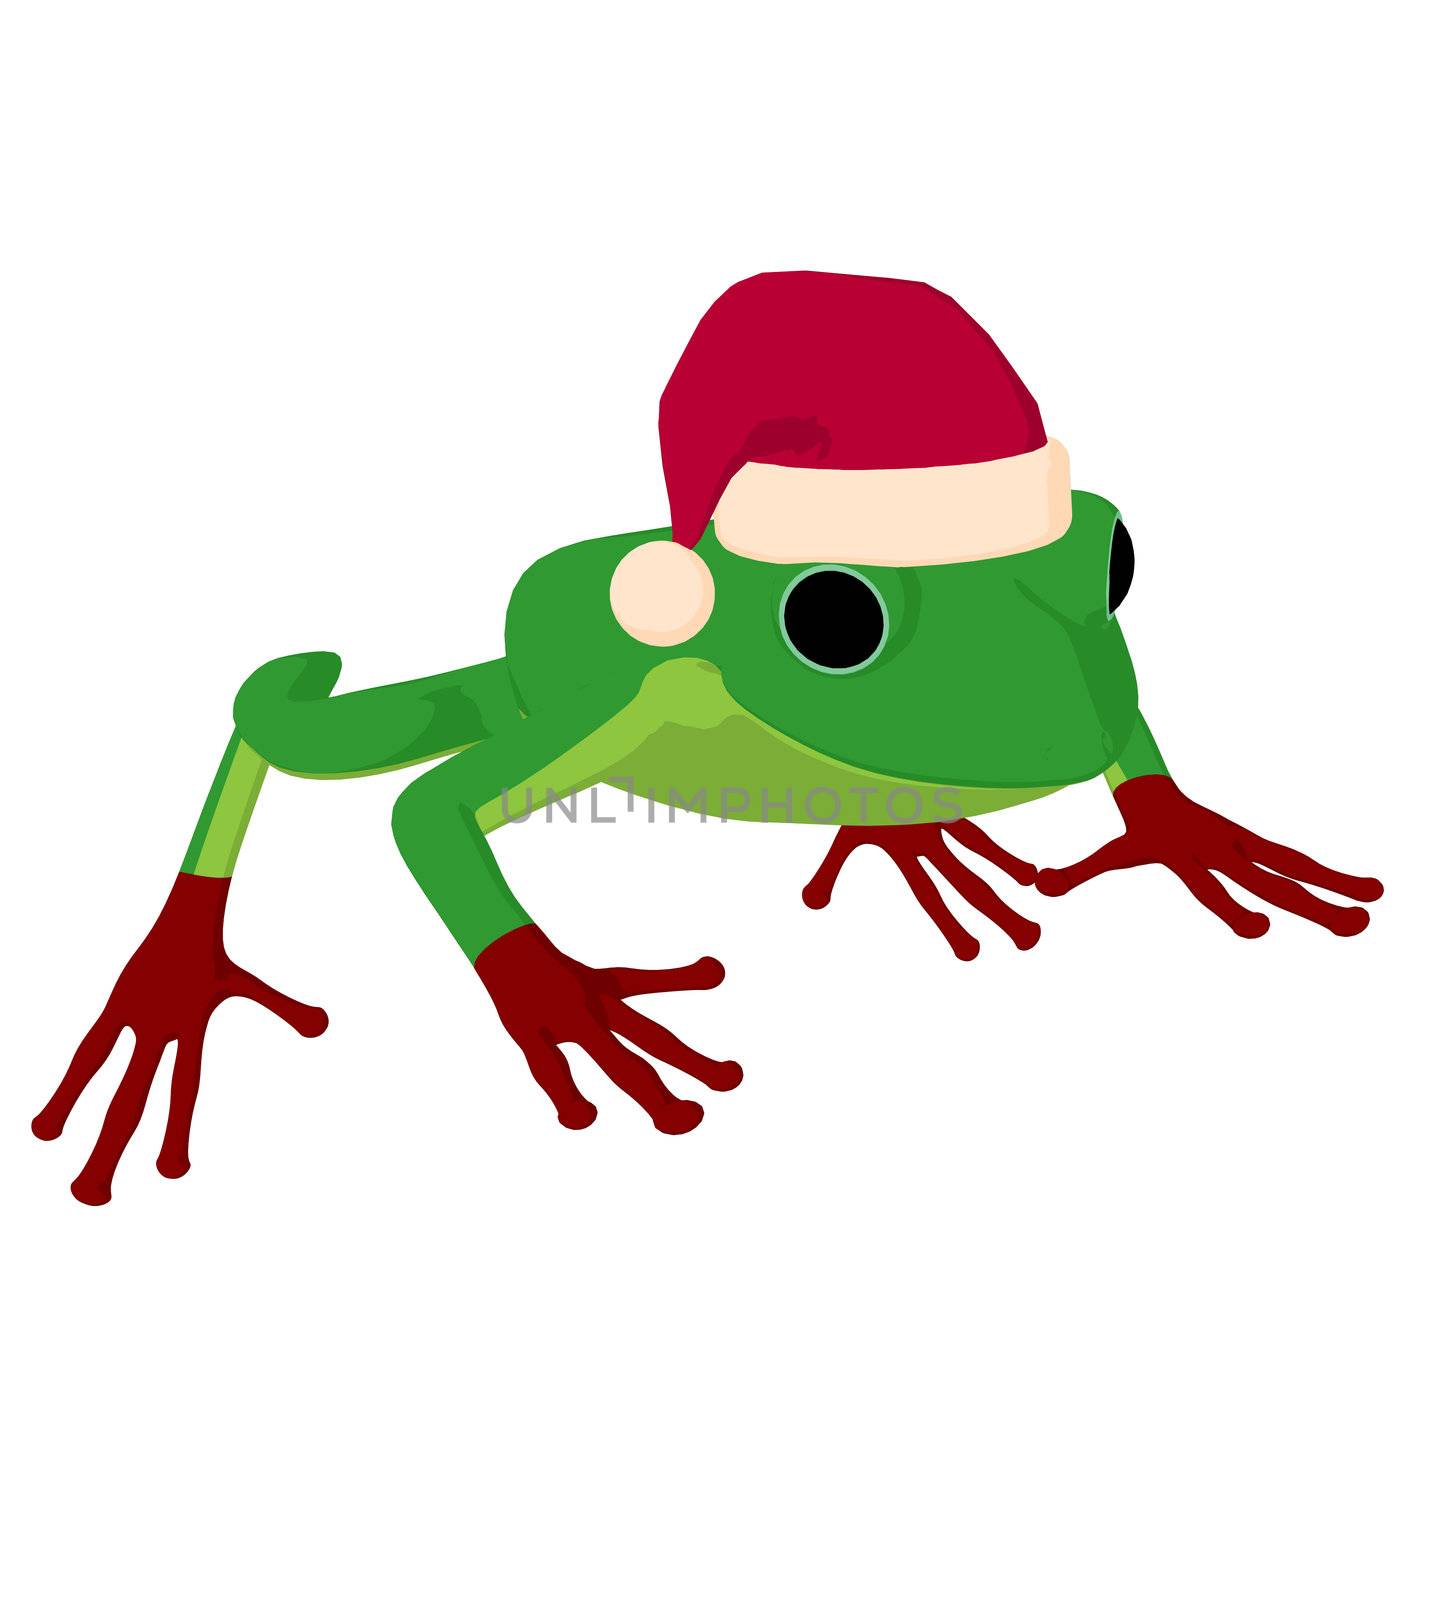 Frog with a santa hat on a white background